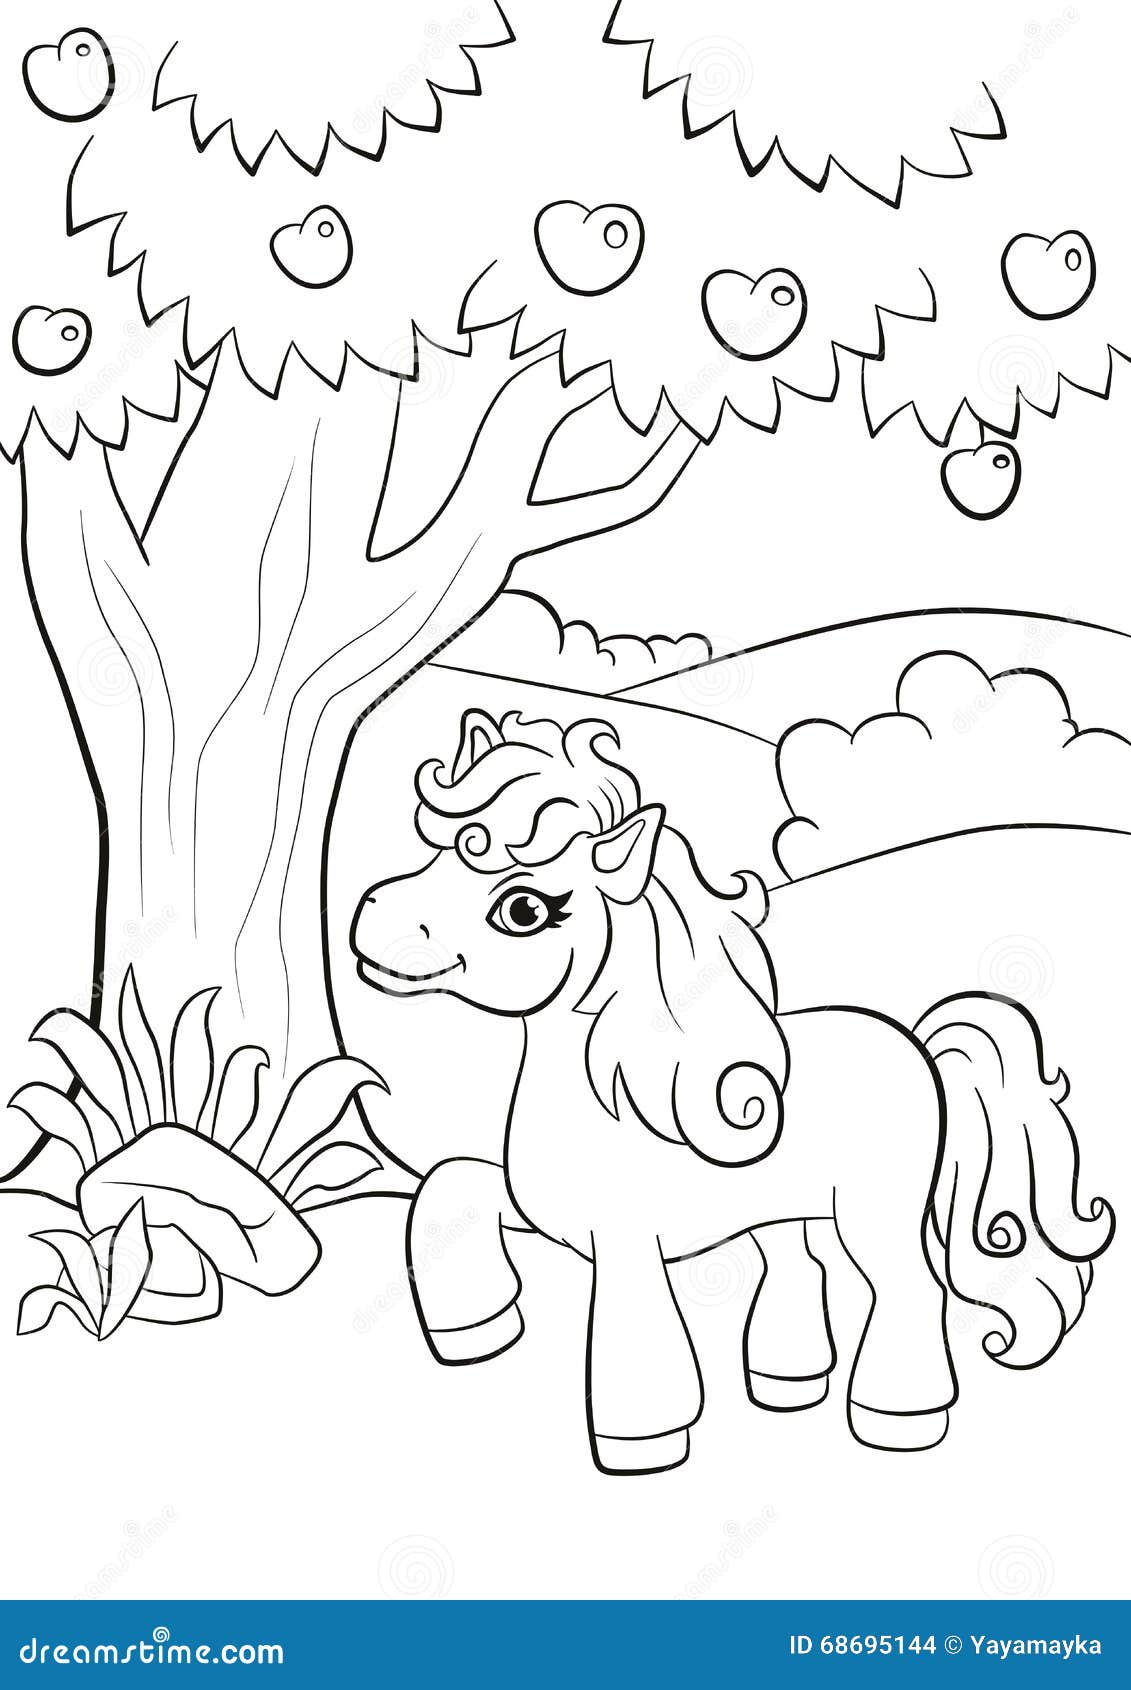 9000 Top Apple Tree Coloring Pages Download Free Images